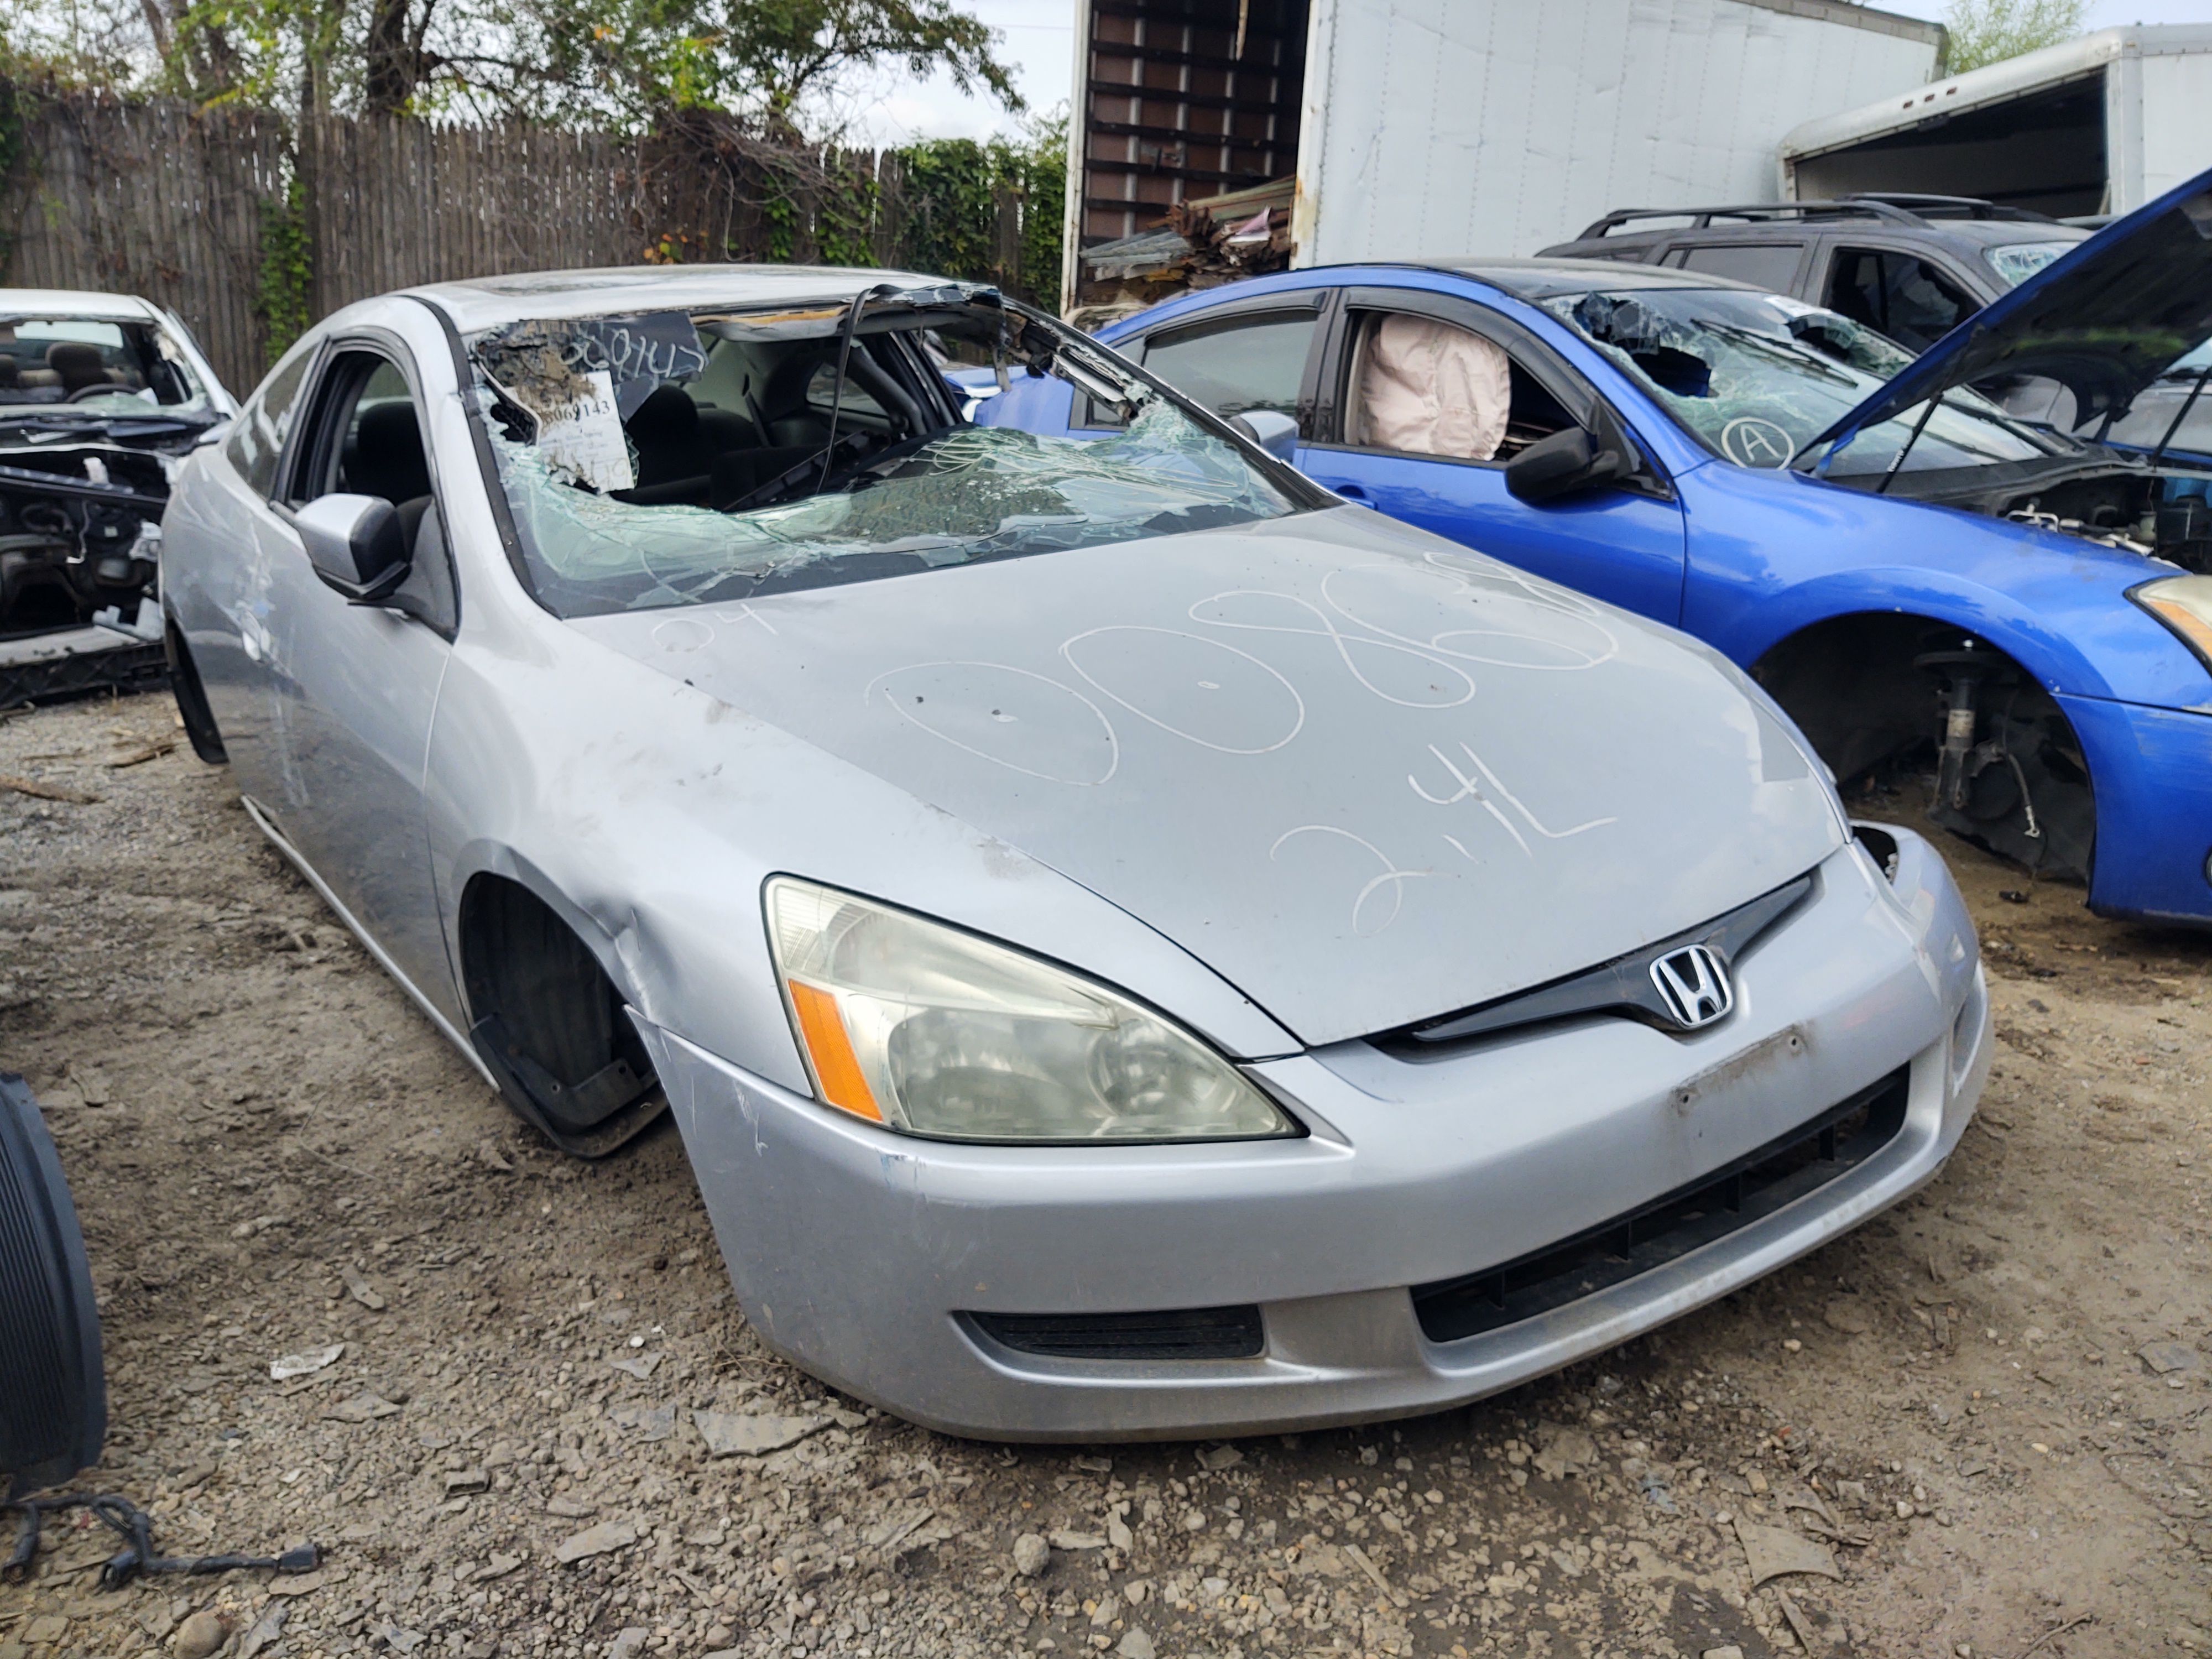 2005 Honda Accord 2 door in for parts cash only you pull.